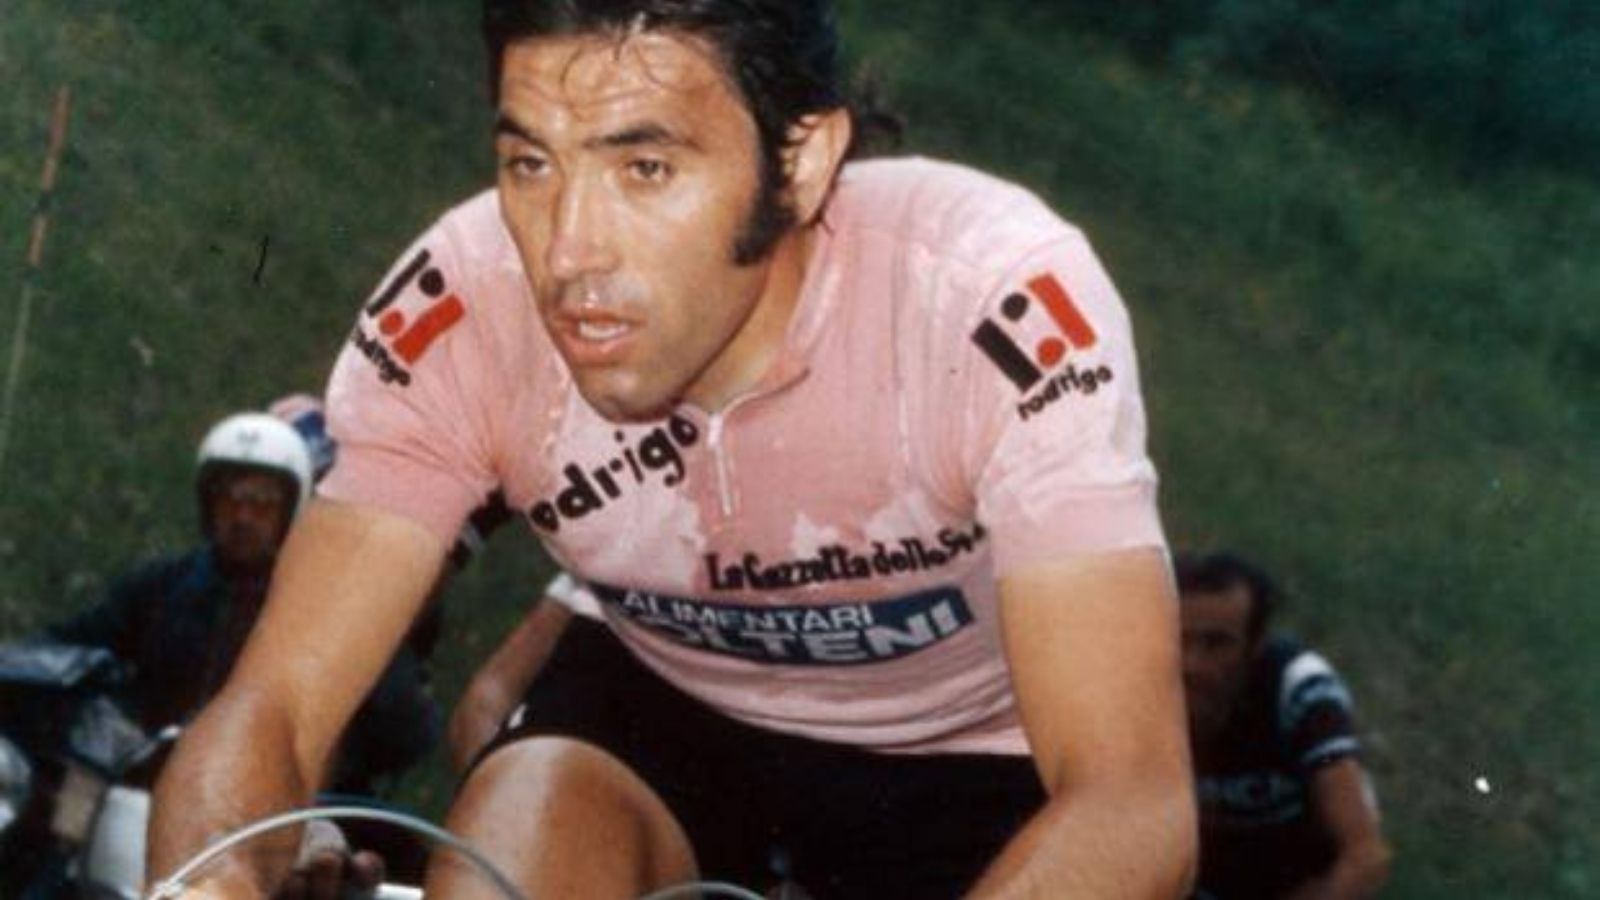 Legendary Belgian cyclist Eddy Merckx spent the most day wearing pink jersey (maglia rosa) during Giro d'Italia